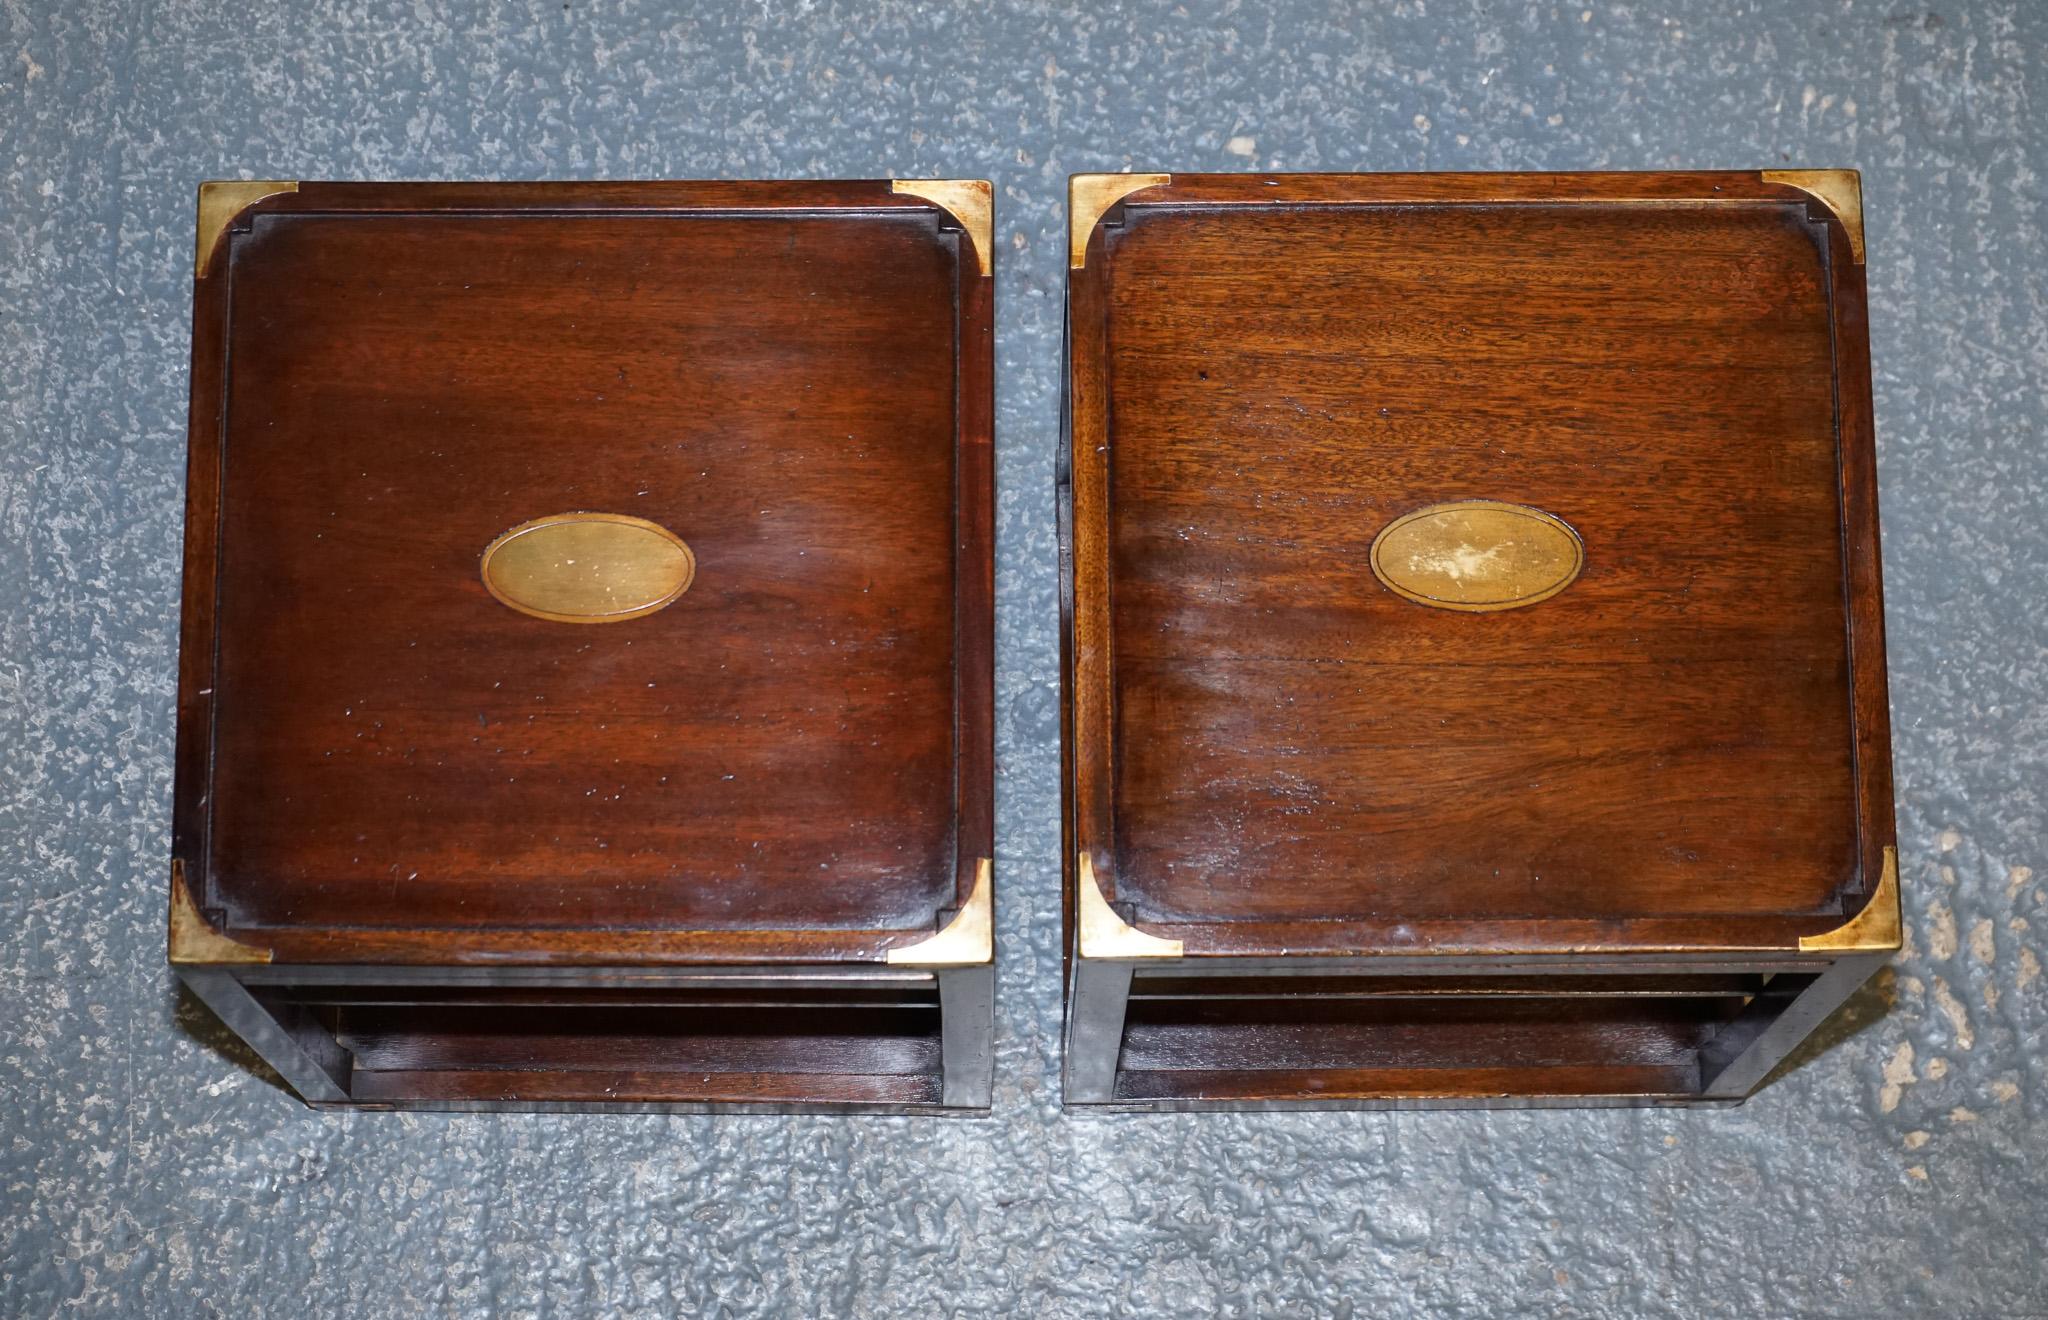 Hardwood RESTORED PAiR OF HARRODS KENNEDY DOUBLE SIDED CAMPAIGN SIDE TABLES BUTLER TRAYS 